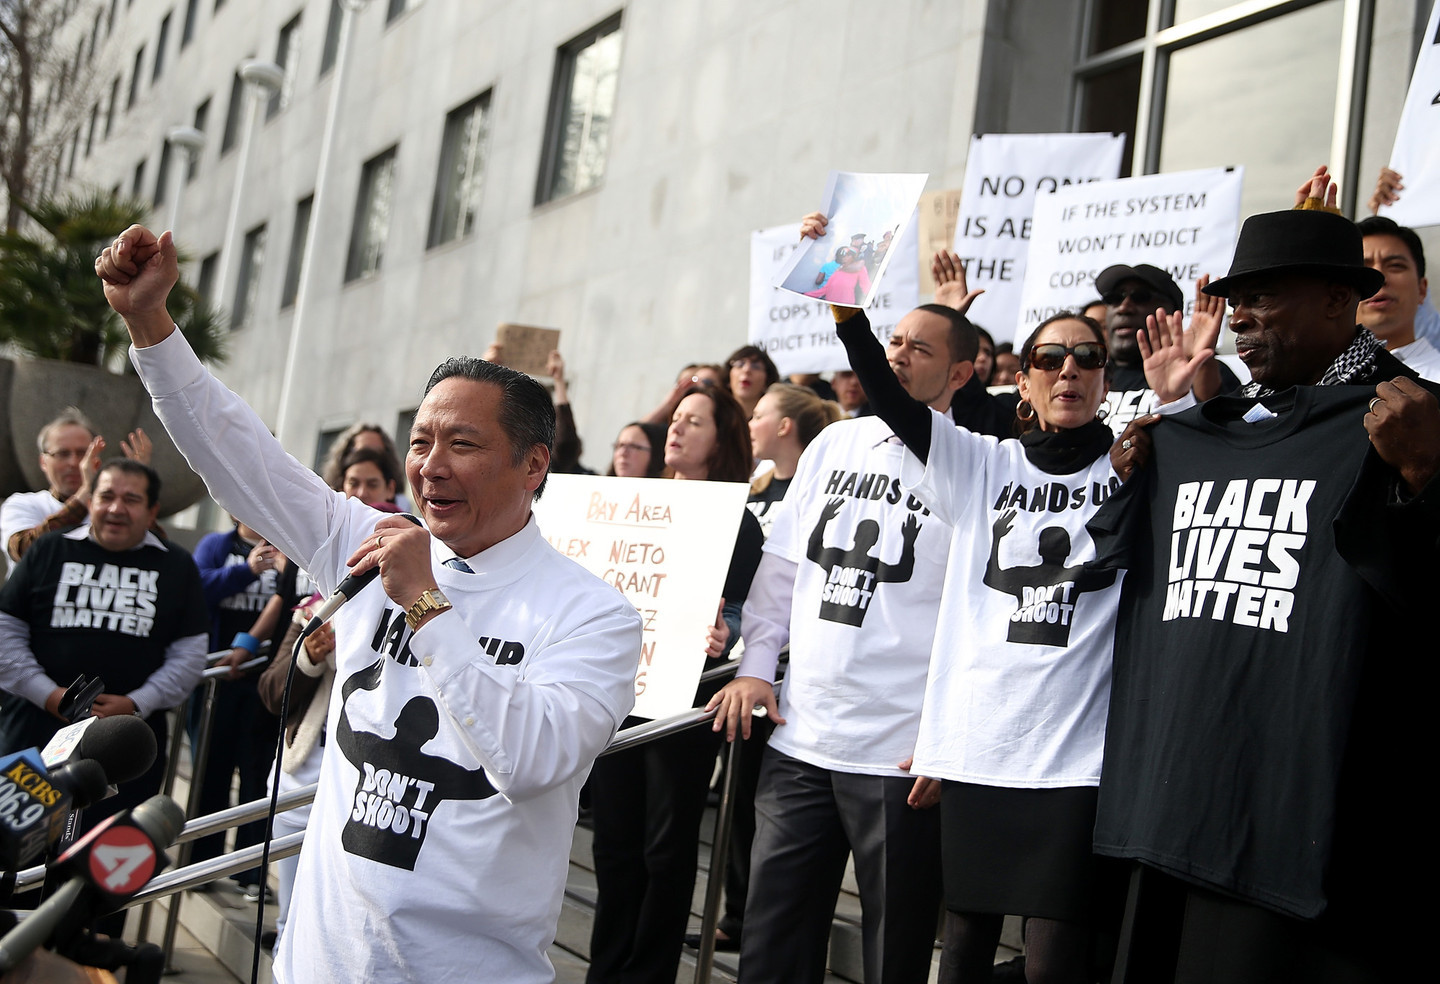 San Francisco Public Defender Jeff Adachi speaks in front of the city's Hall of Justice during a demonstration on Dec. 18. Public defenders in Alameda, Contra Costa, Santa Clara and Solano counties staged similar actions today at their county courthouses.